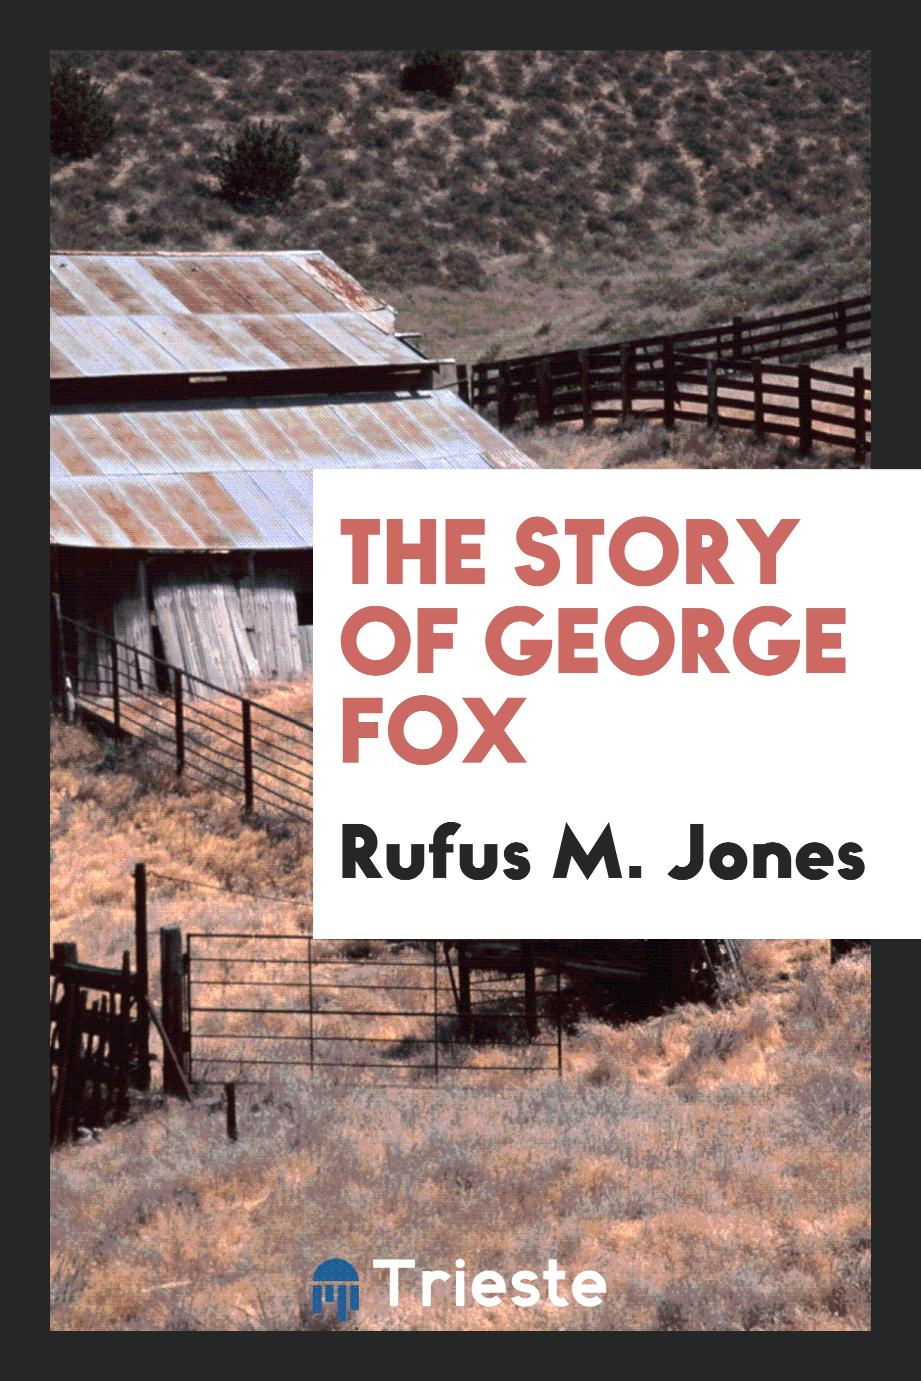 The story of George Fox